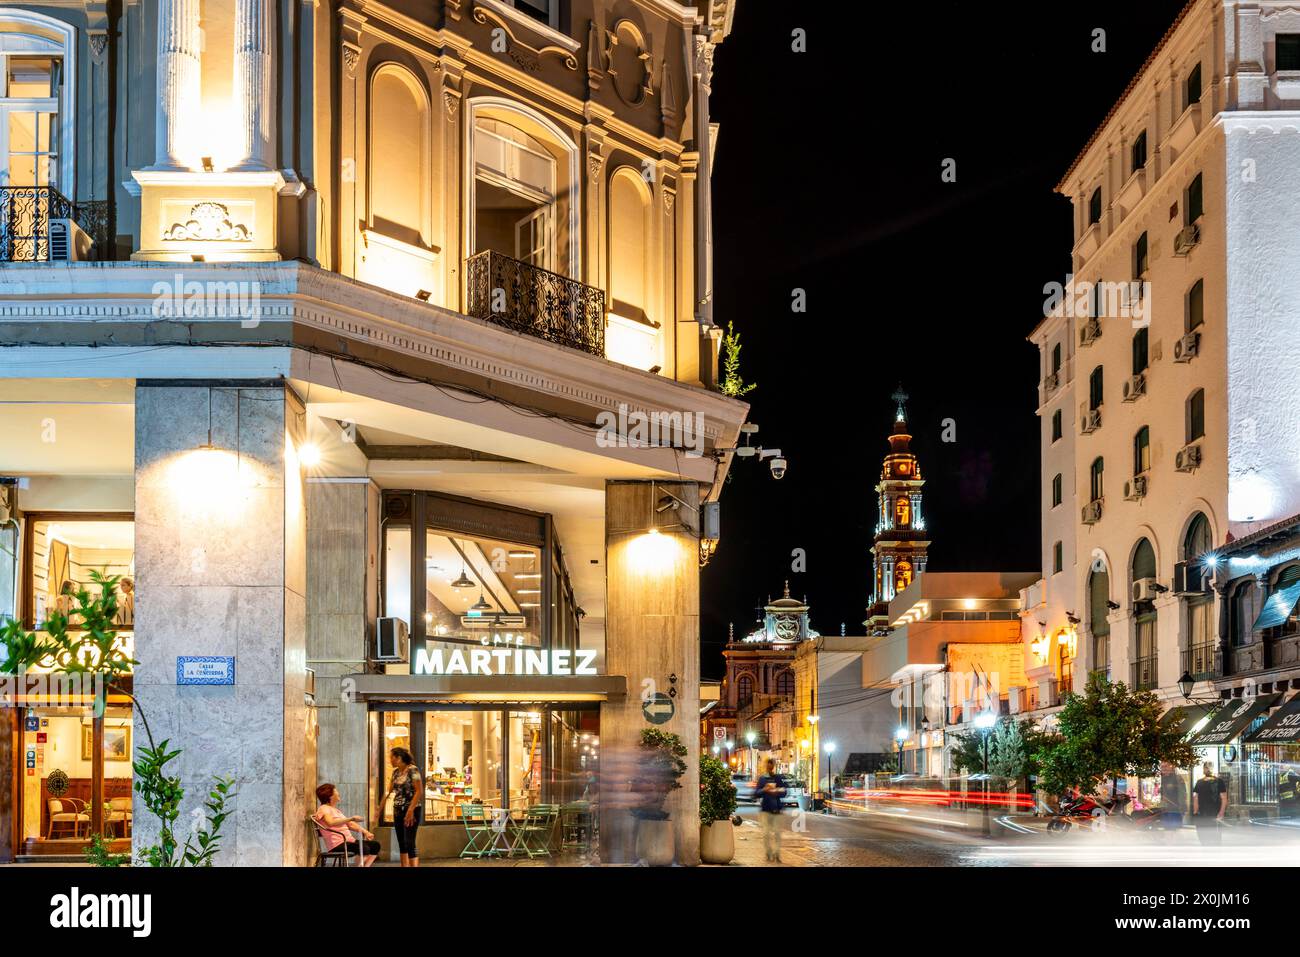 A Night Time View of Cafe Martinez On The Plaza 9 de Julio, Salta, Salta Province, Argentina. Stock Photo